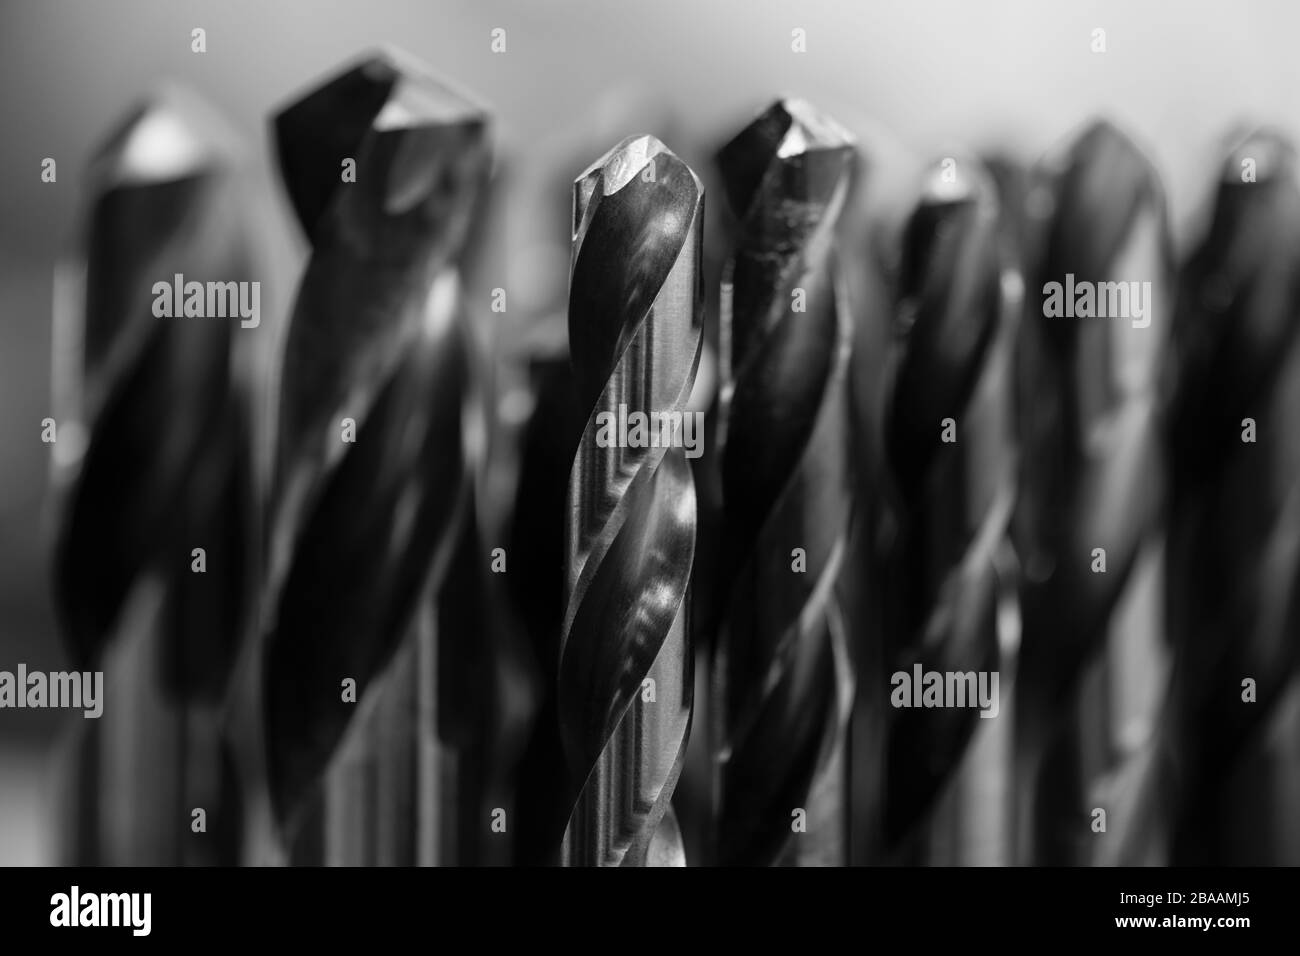 Set of steel drill bits for drill press Stock Photo